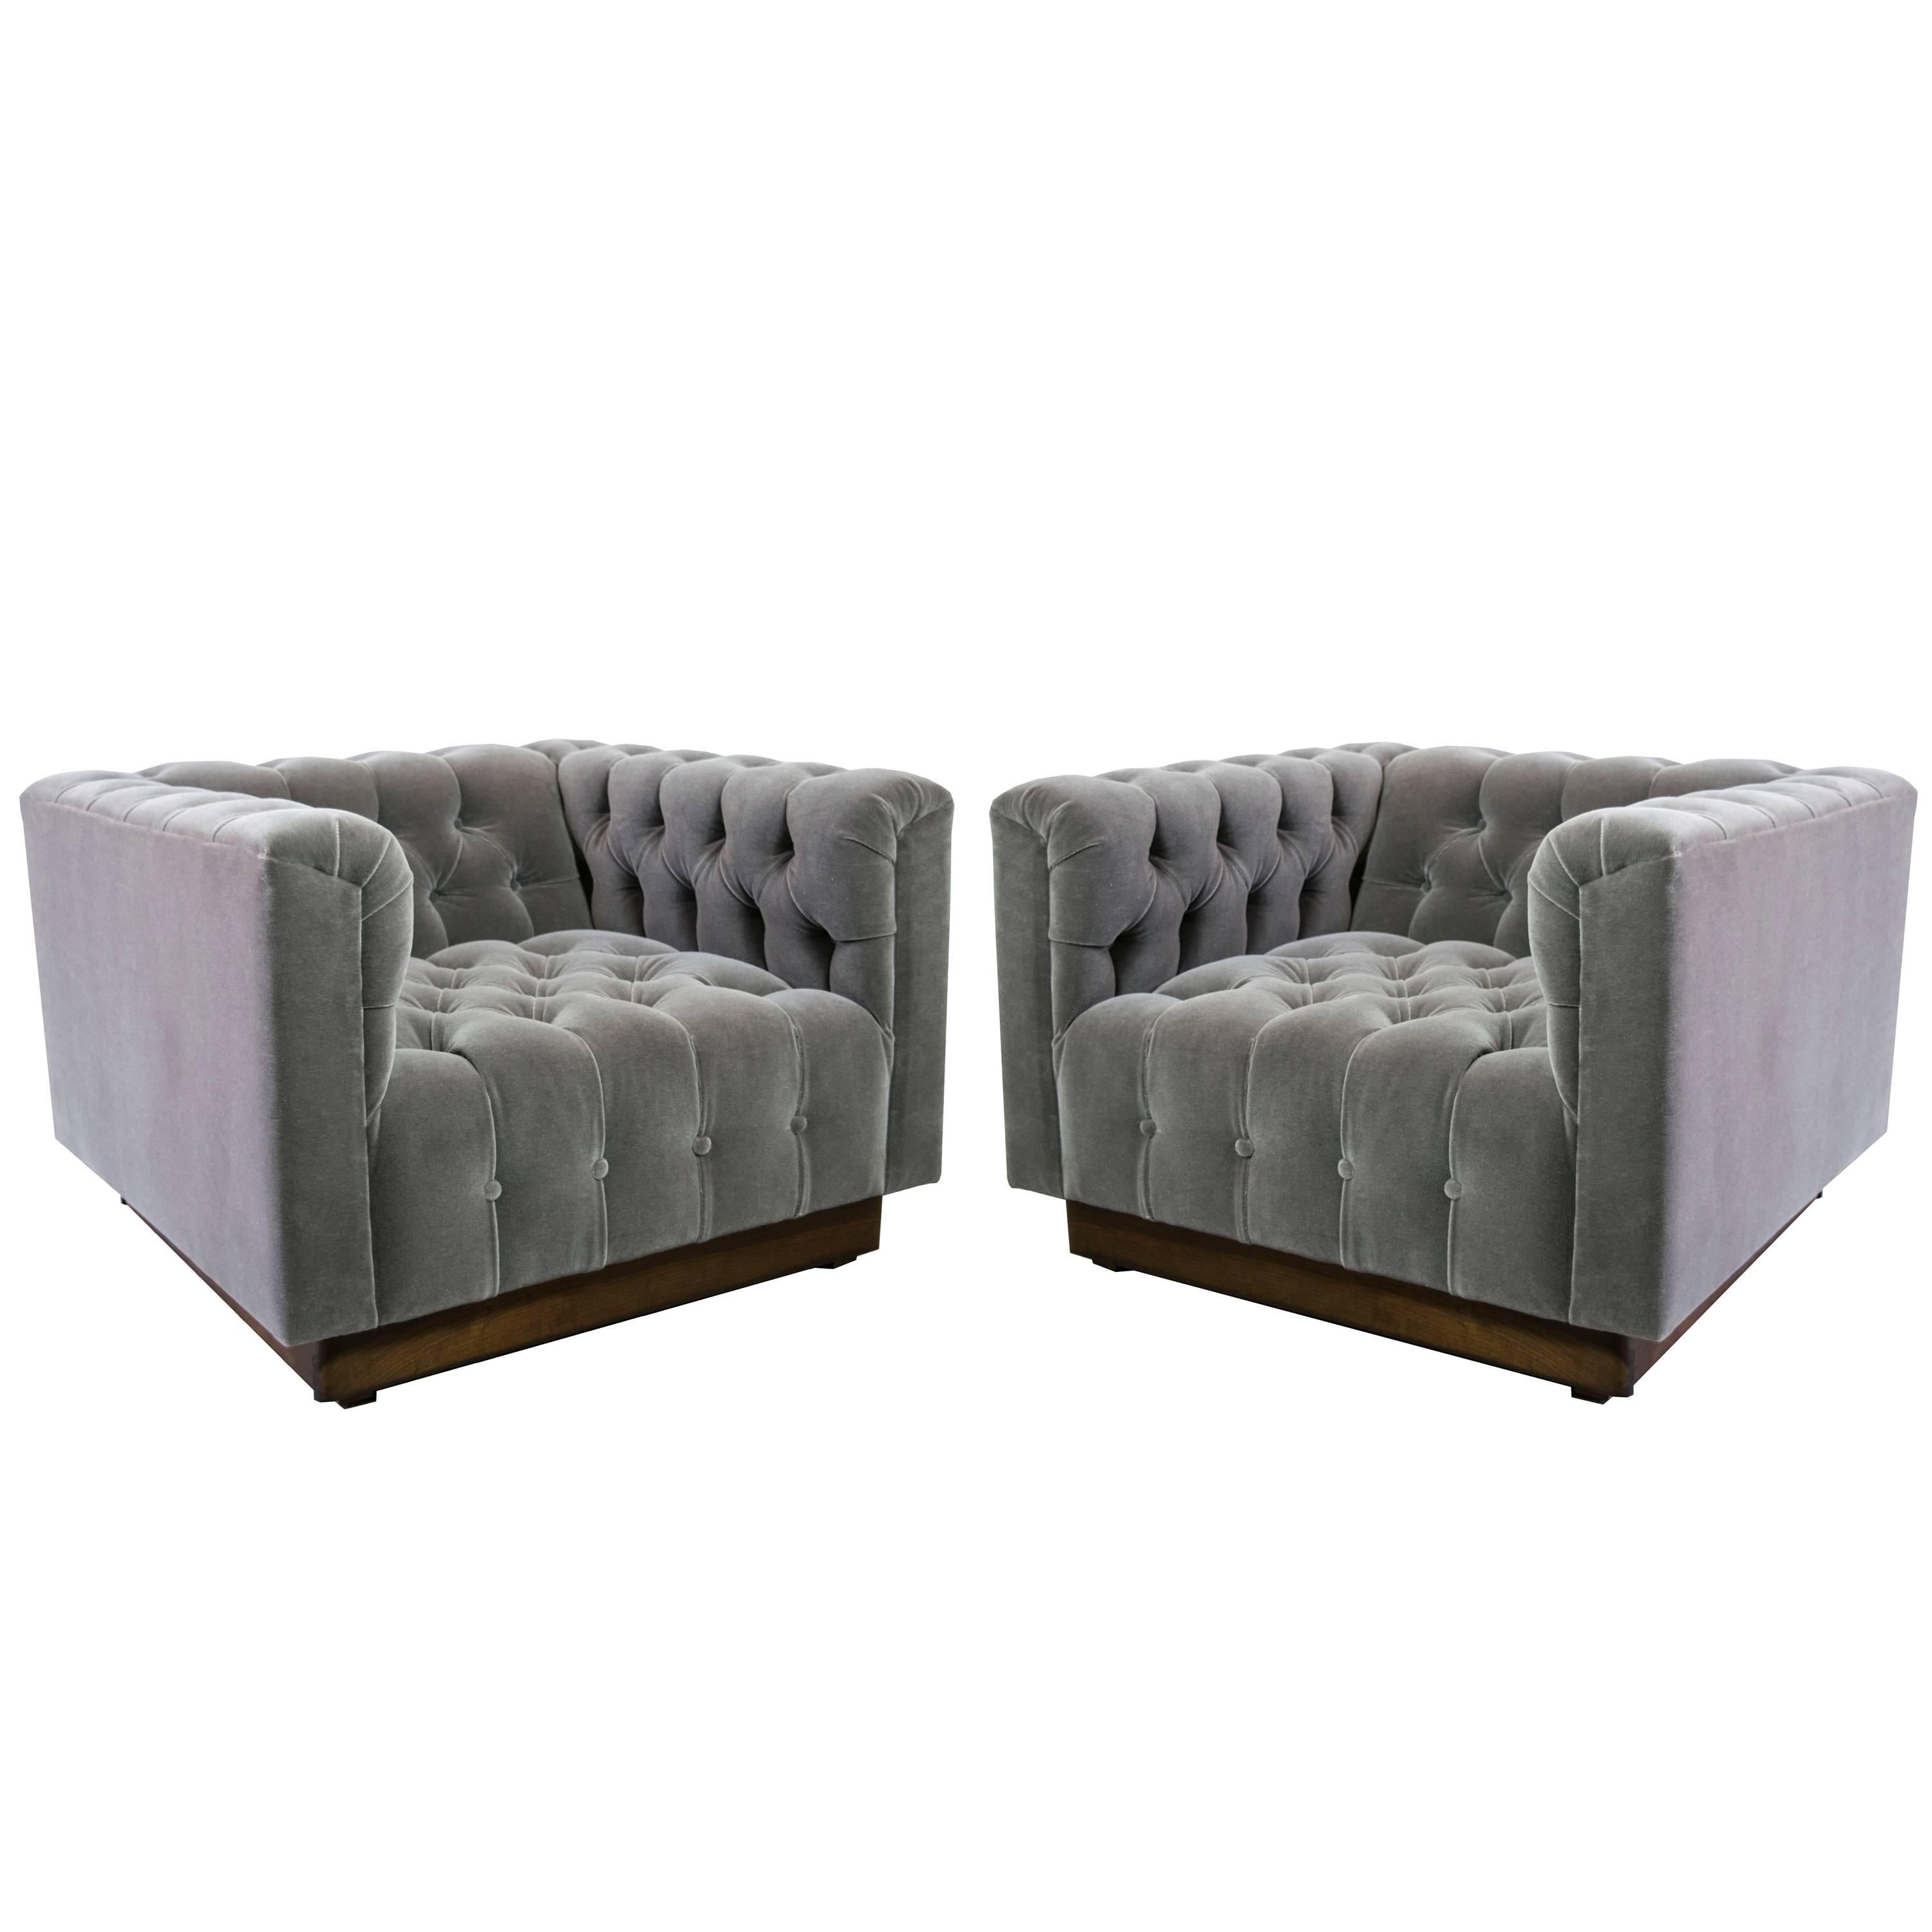 Oversized Milo Baughman Tufted Lounge Chairs in Smoky Gray Mohair For Sale